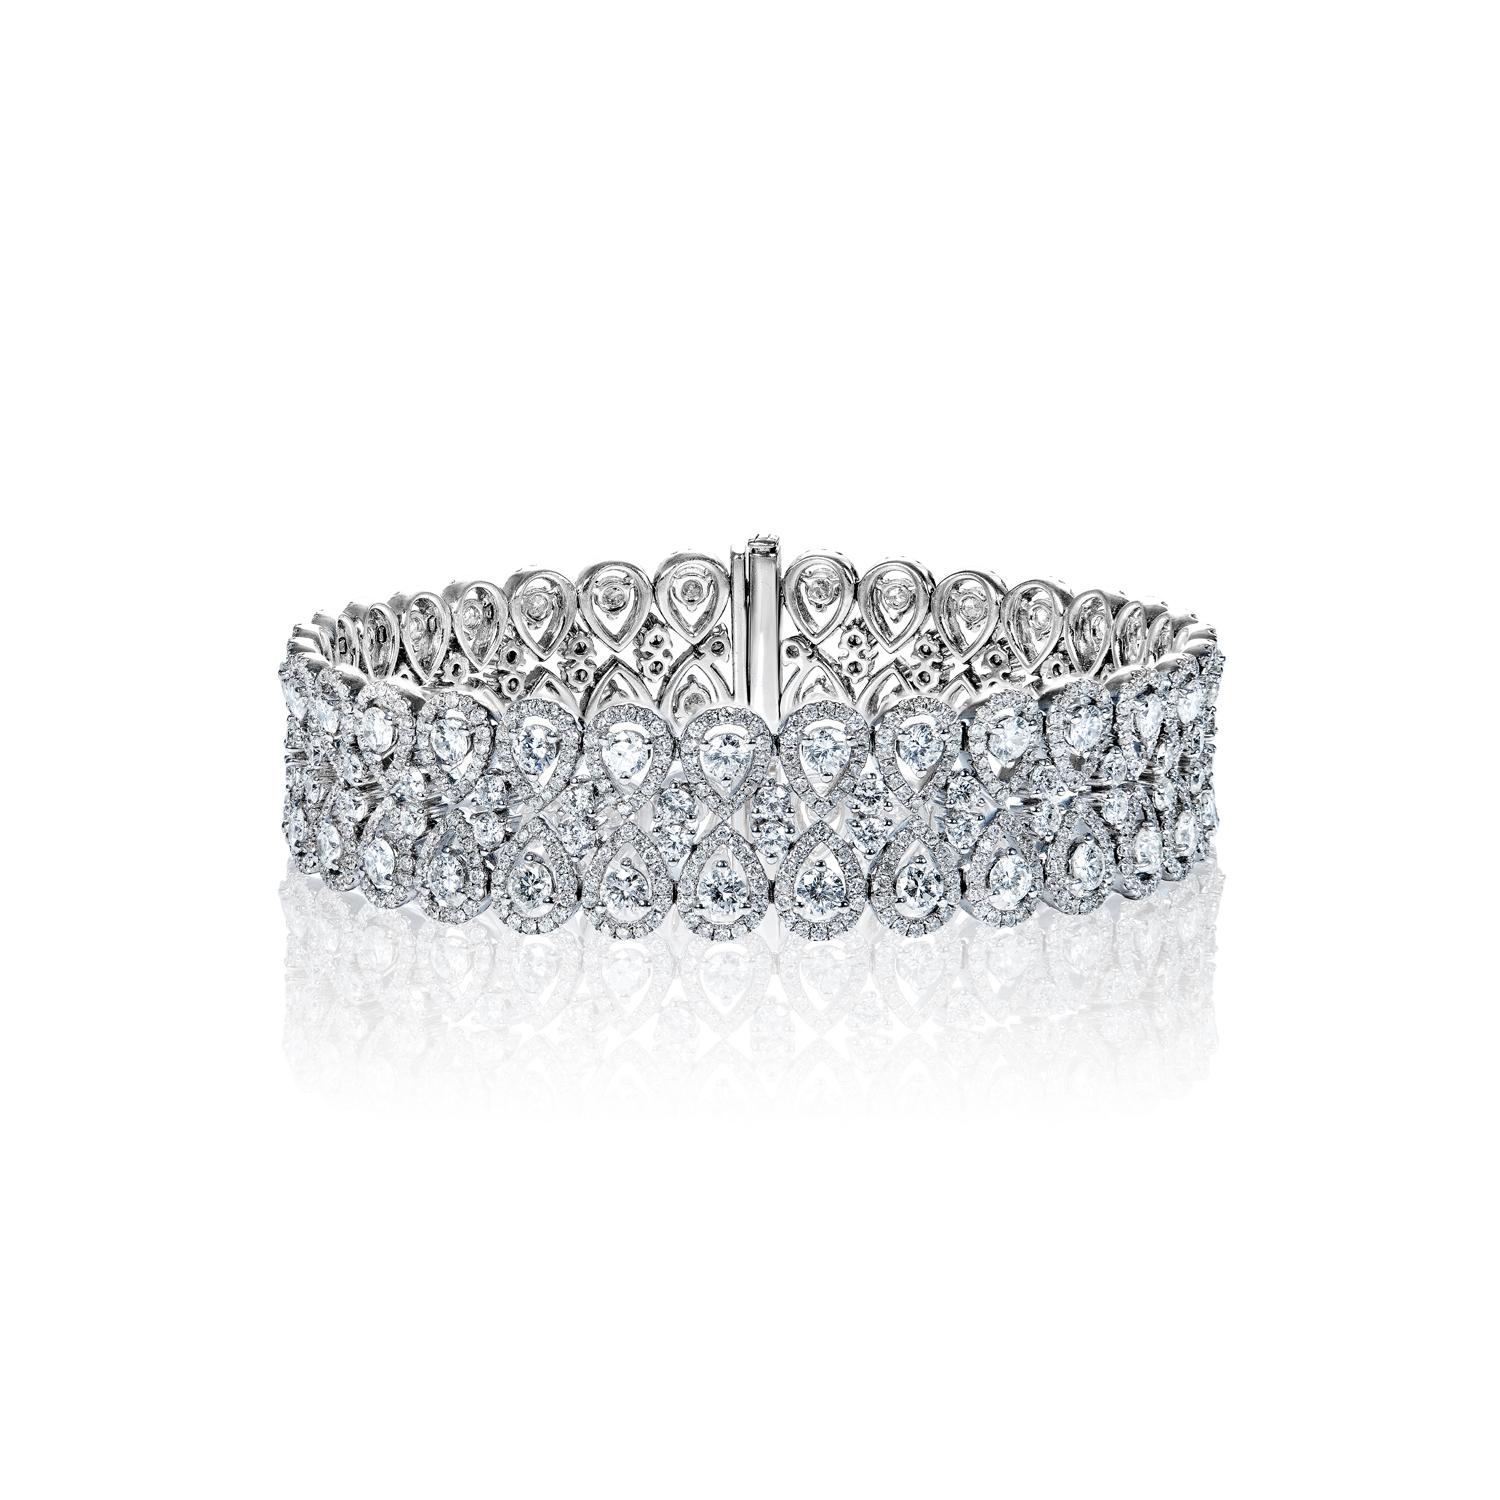 Style: Diamond Double Row Bracelet
Diamonds
Diamond Size: 6.26 Carats
Diamond Shape: Pear Shape

Diamond Size: 5.25 Carats
Diamond Shape: Round Brilliant Cut

Setting
Metal: 18K White Gold
Clasp: Box catch with hidden safety

Total Carat Weight: